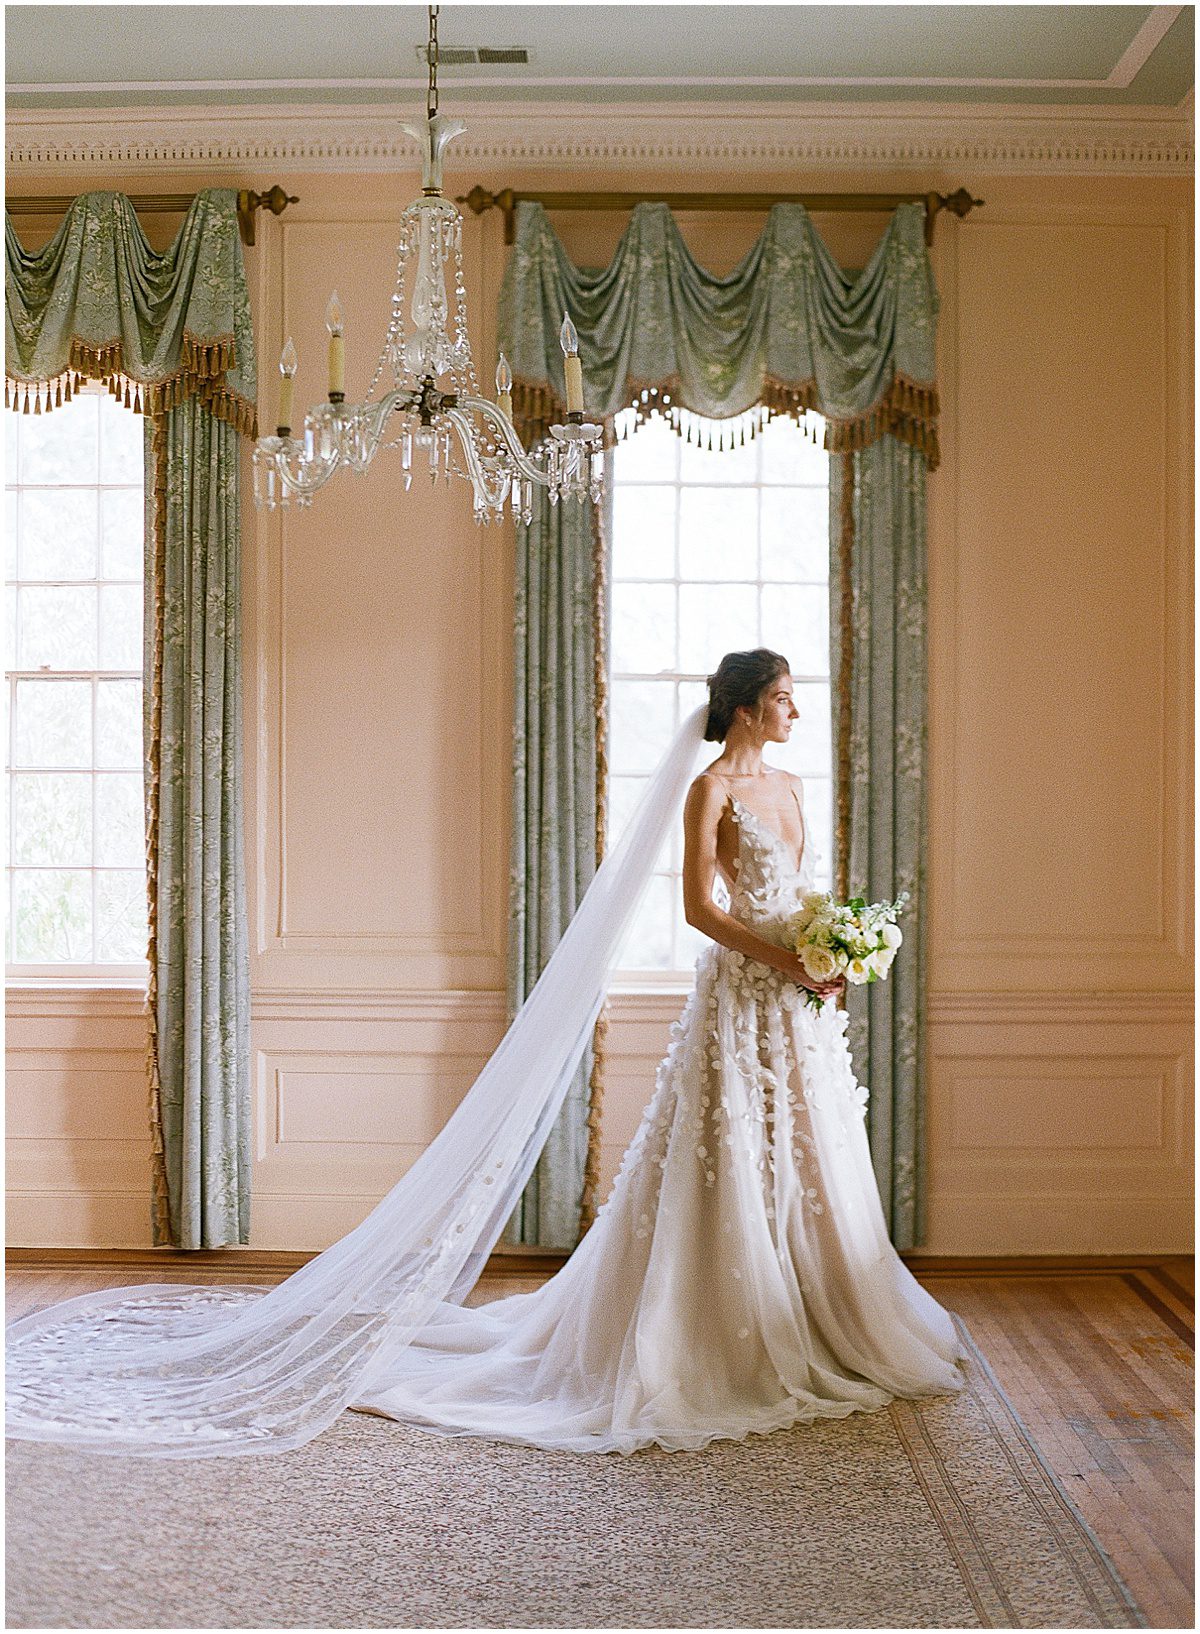 Bride Looking Out Window Holding Flowers at Lowndes Grove Photo